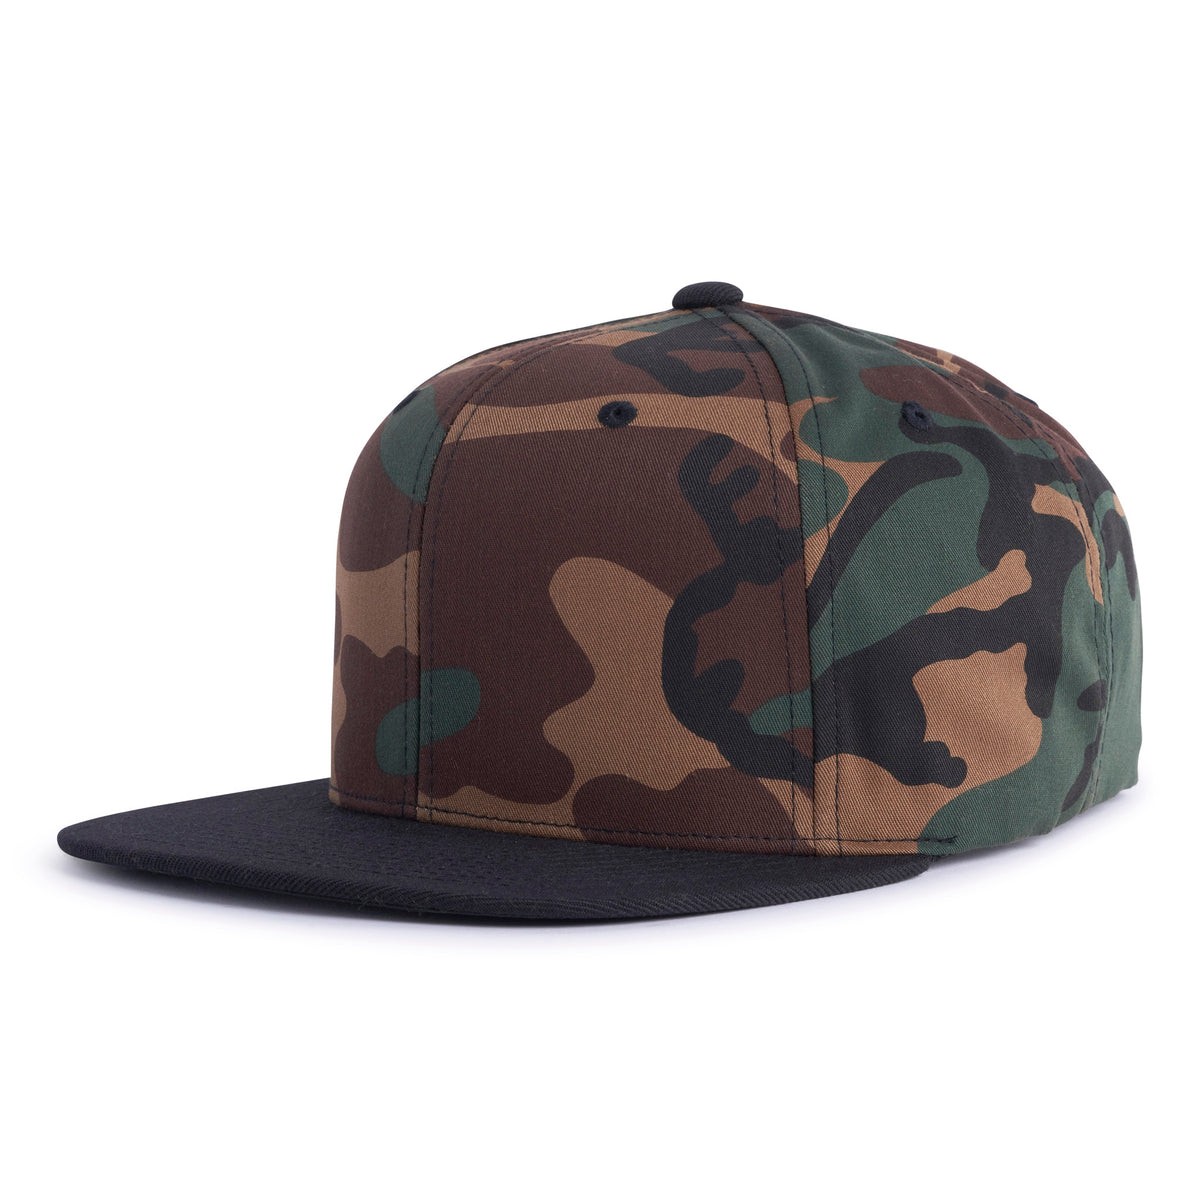 Classic camo trucker hat with a black flat bill, 6-panels, structured mid/high crown, and a snapback closure from Tailgate Hats.